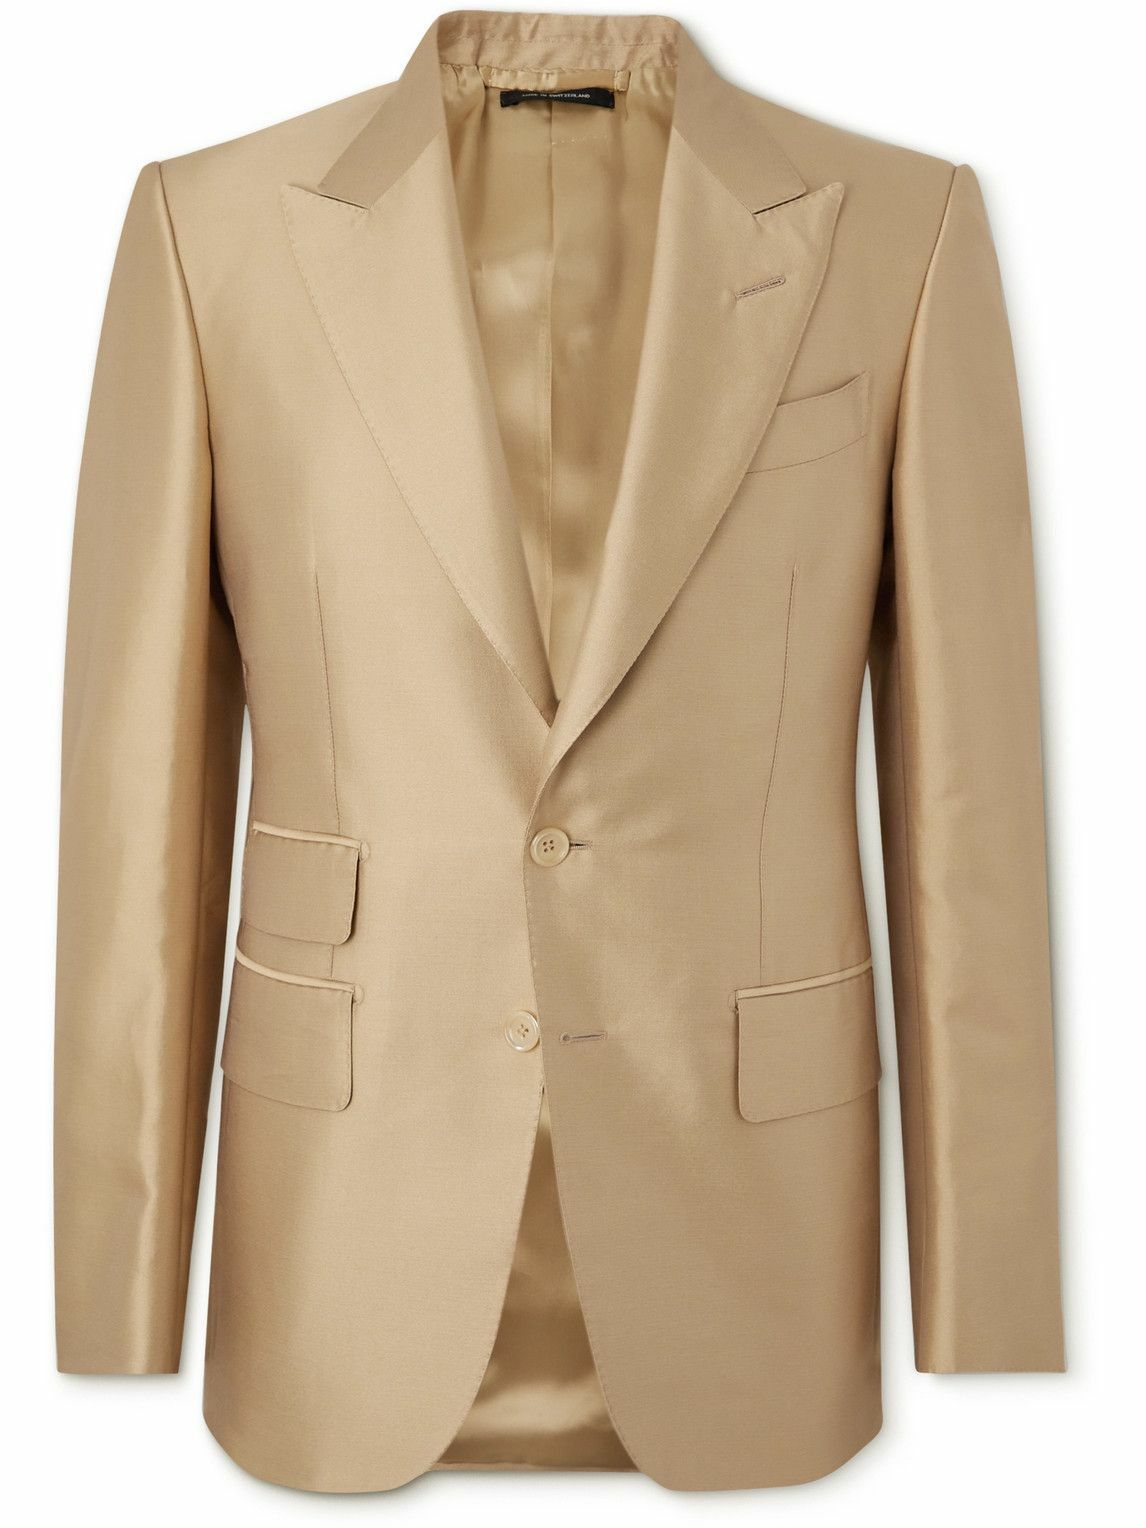 TOM FORD - Slim-Fit Satin-Twill Suit Jacket - Gold TOM FORD